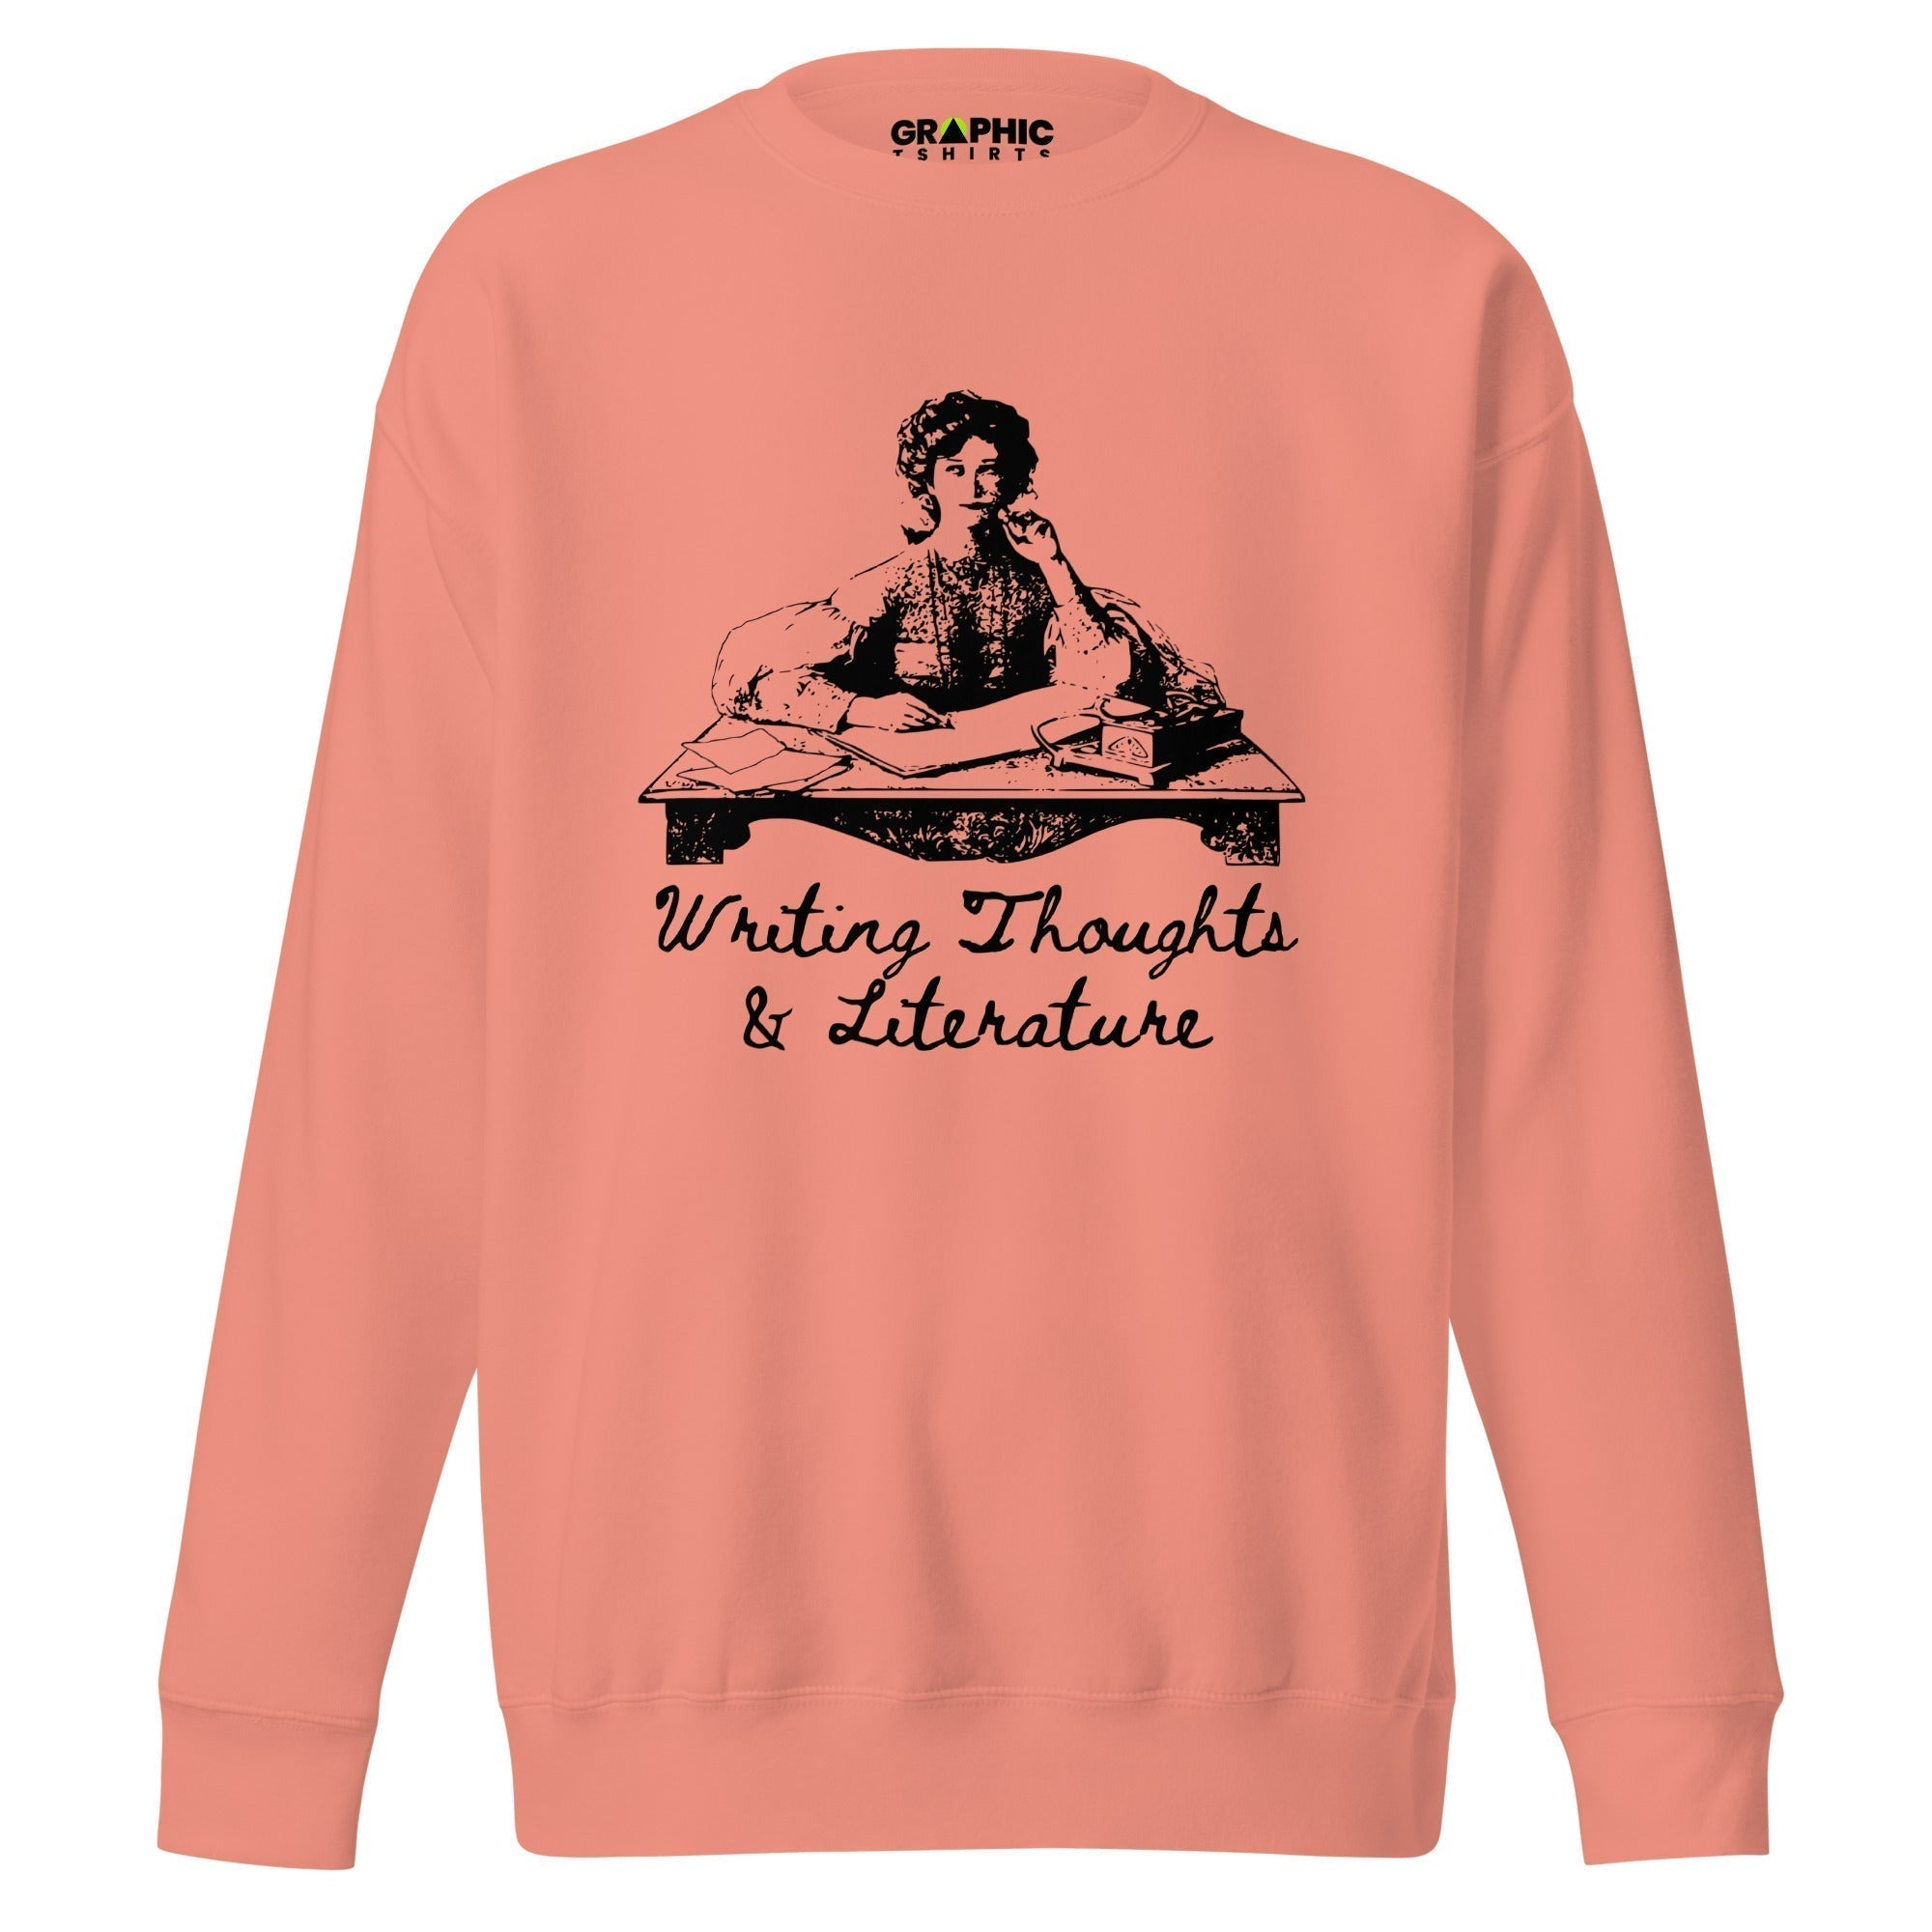 Unisex Premium Sweatshirt - Cotton Heritage - Writing Thoughts And Literature Vintage - GRAPHIC T-SHIRTS